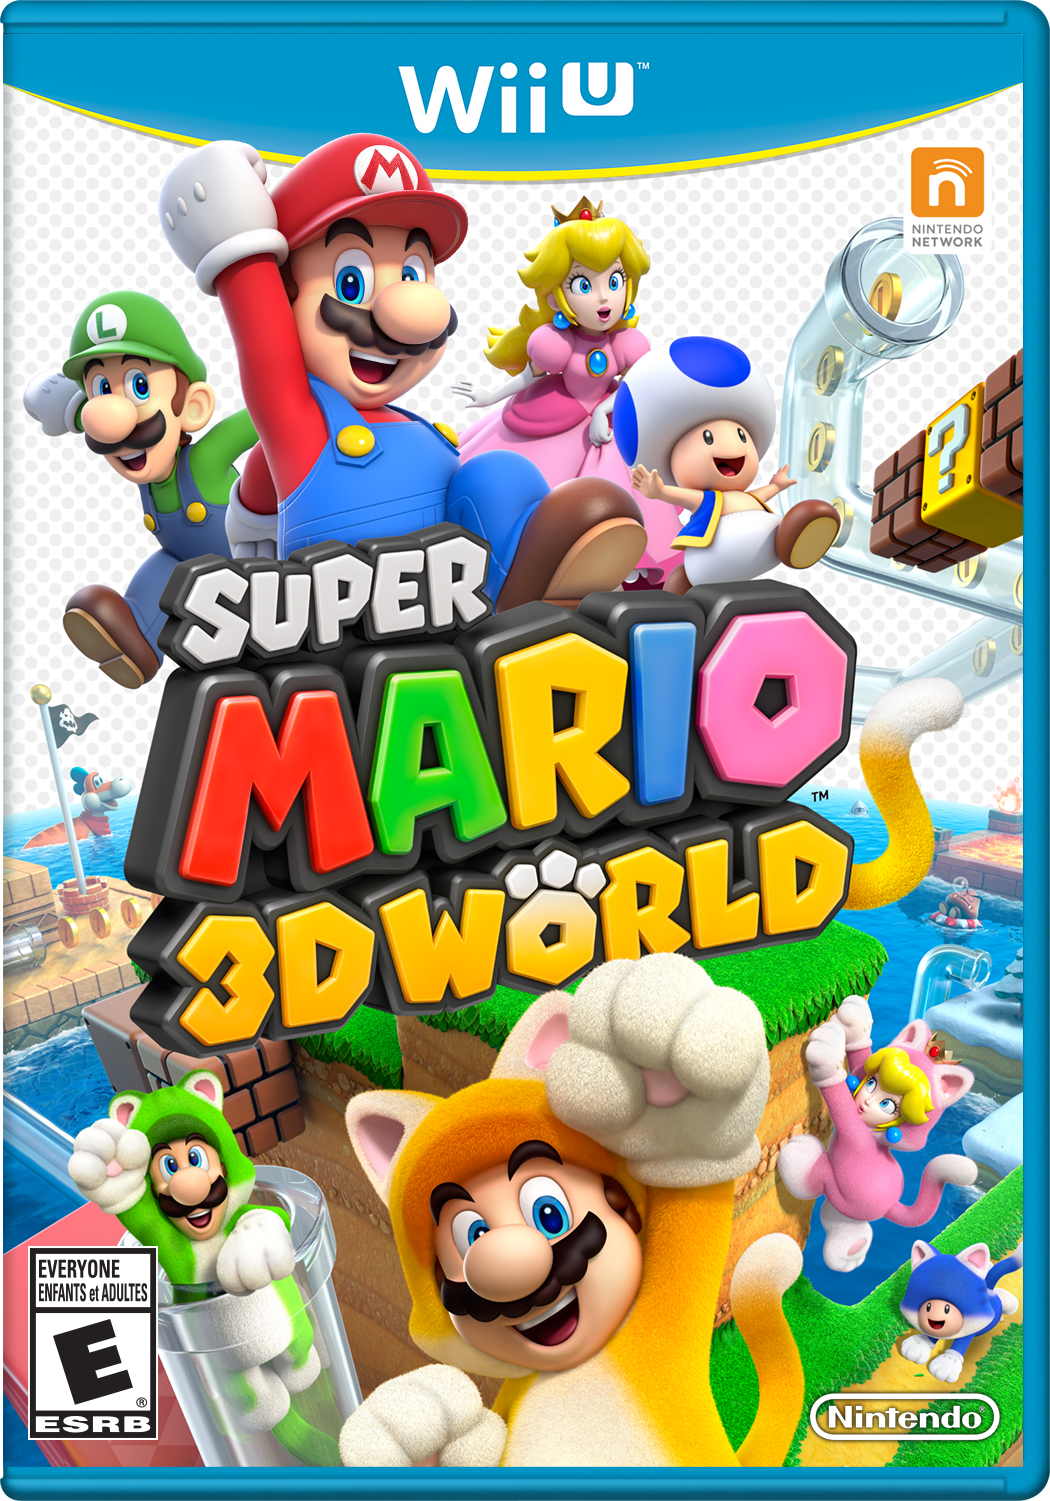 super-mario-3d-world-strategywiki-the-video-game-walkthrough-and-strategy-guide-wiki